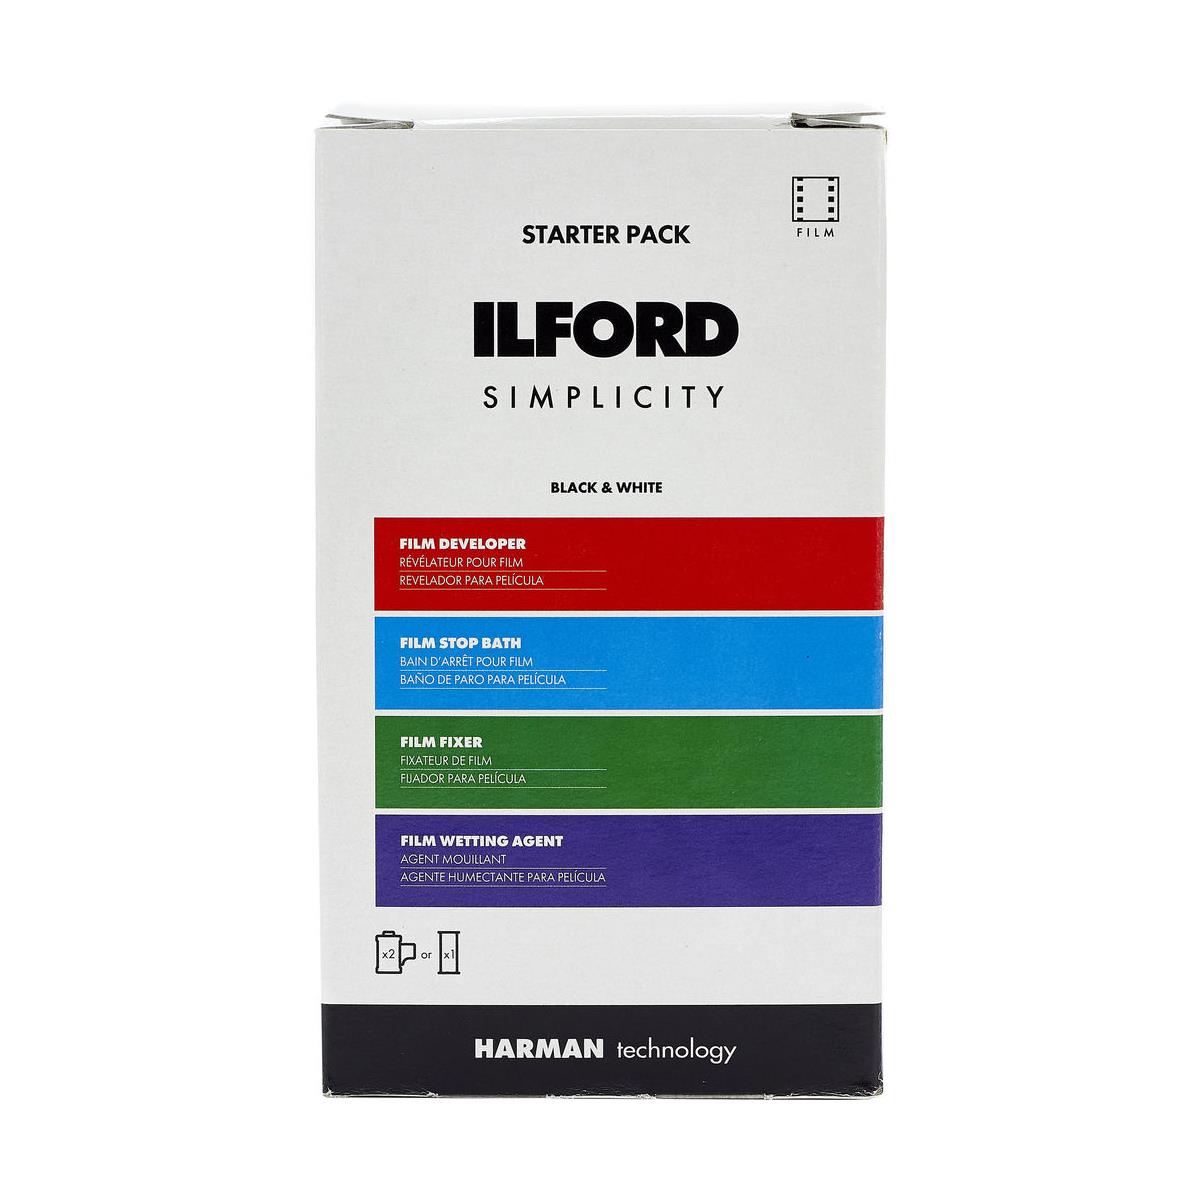 Image of Ilford ILFORD SIMPLICITY Starter Pack